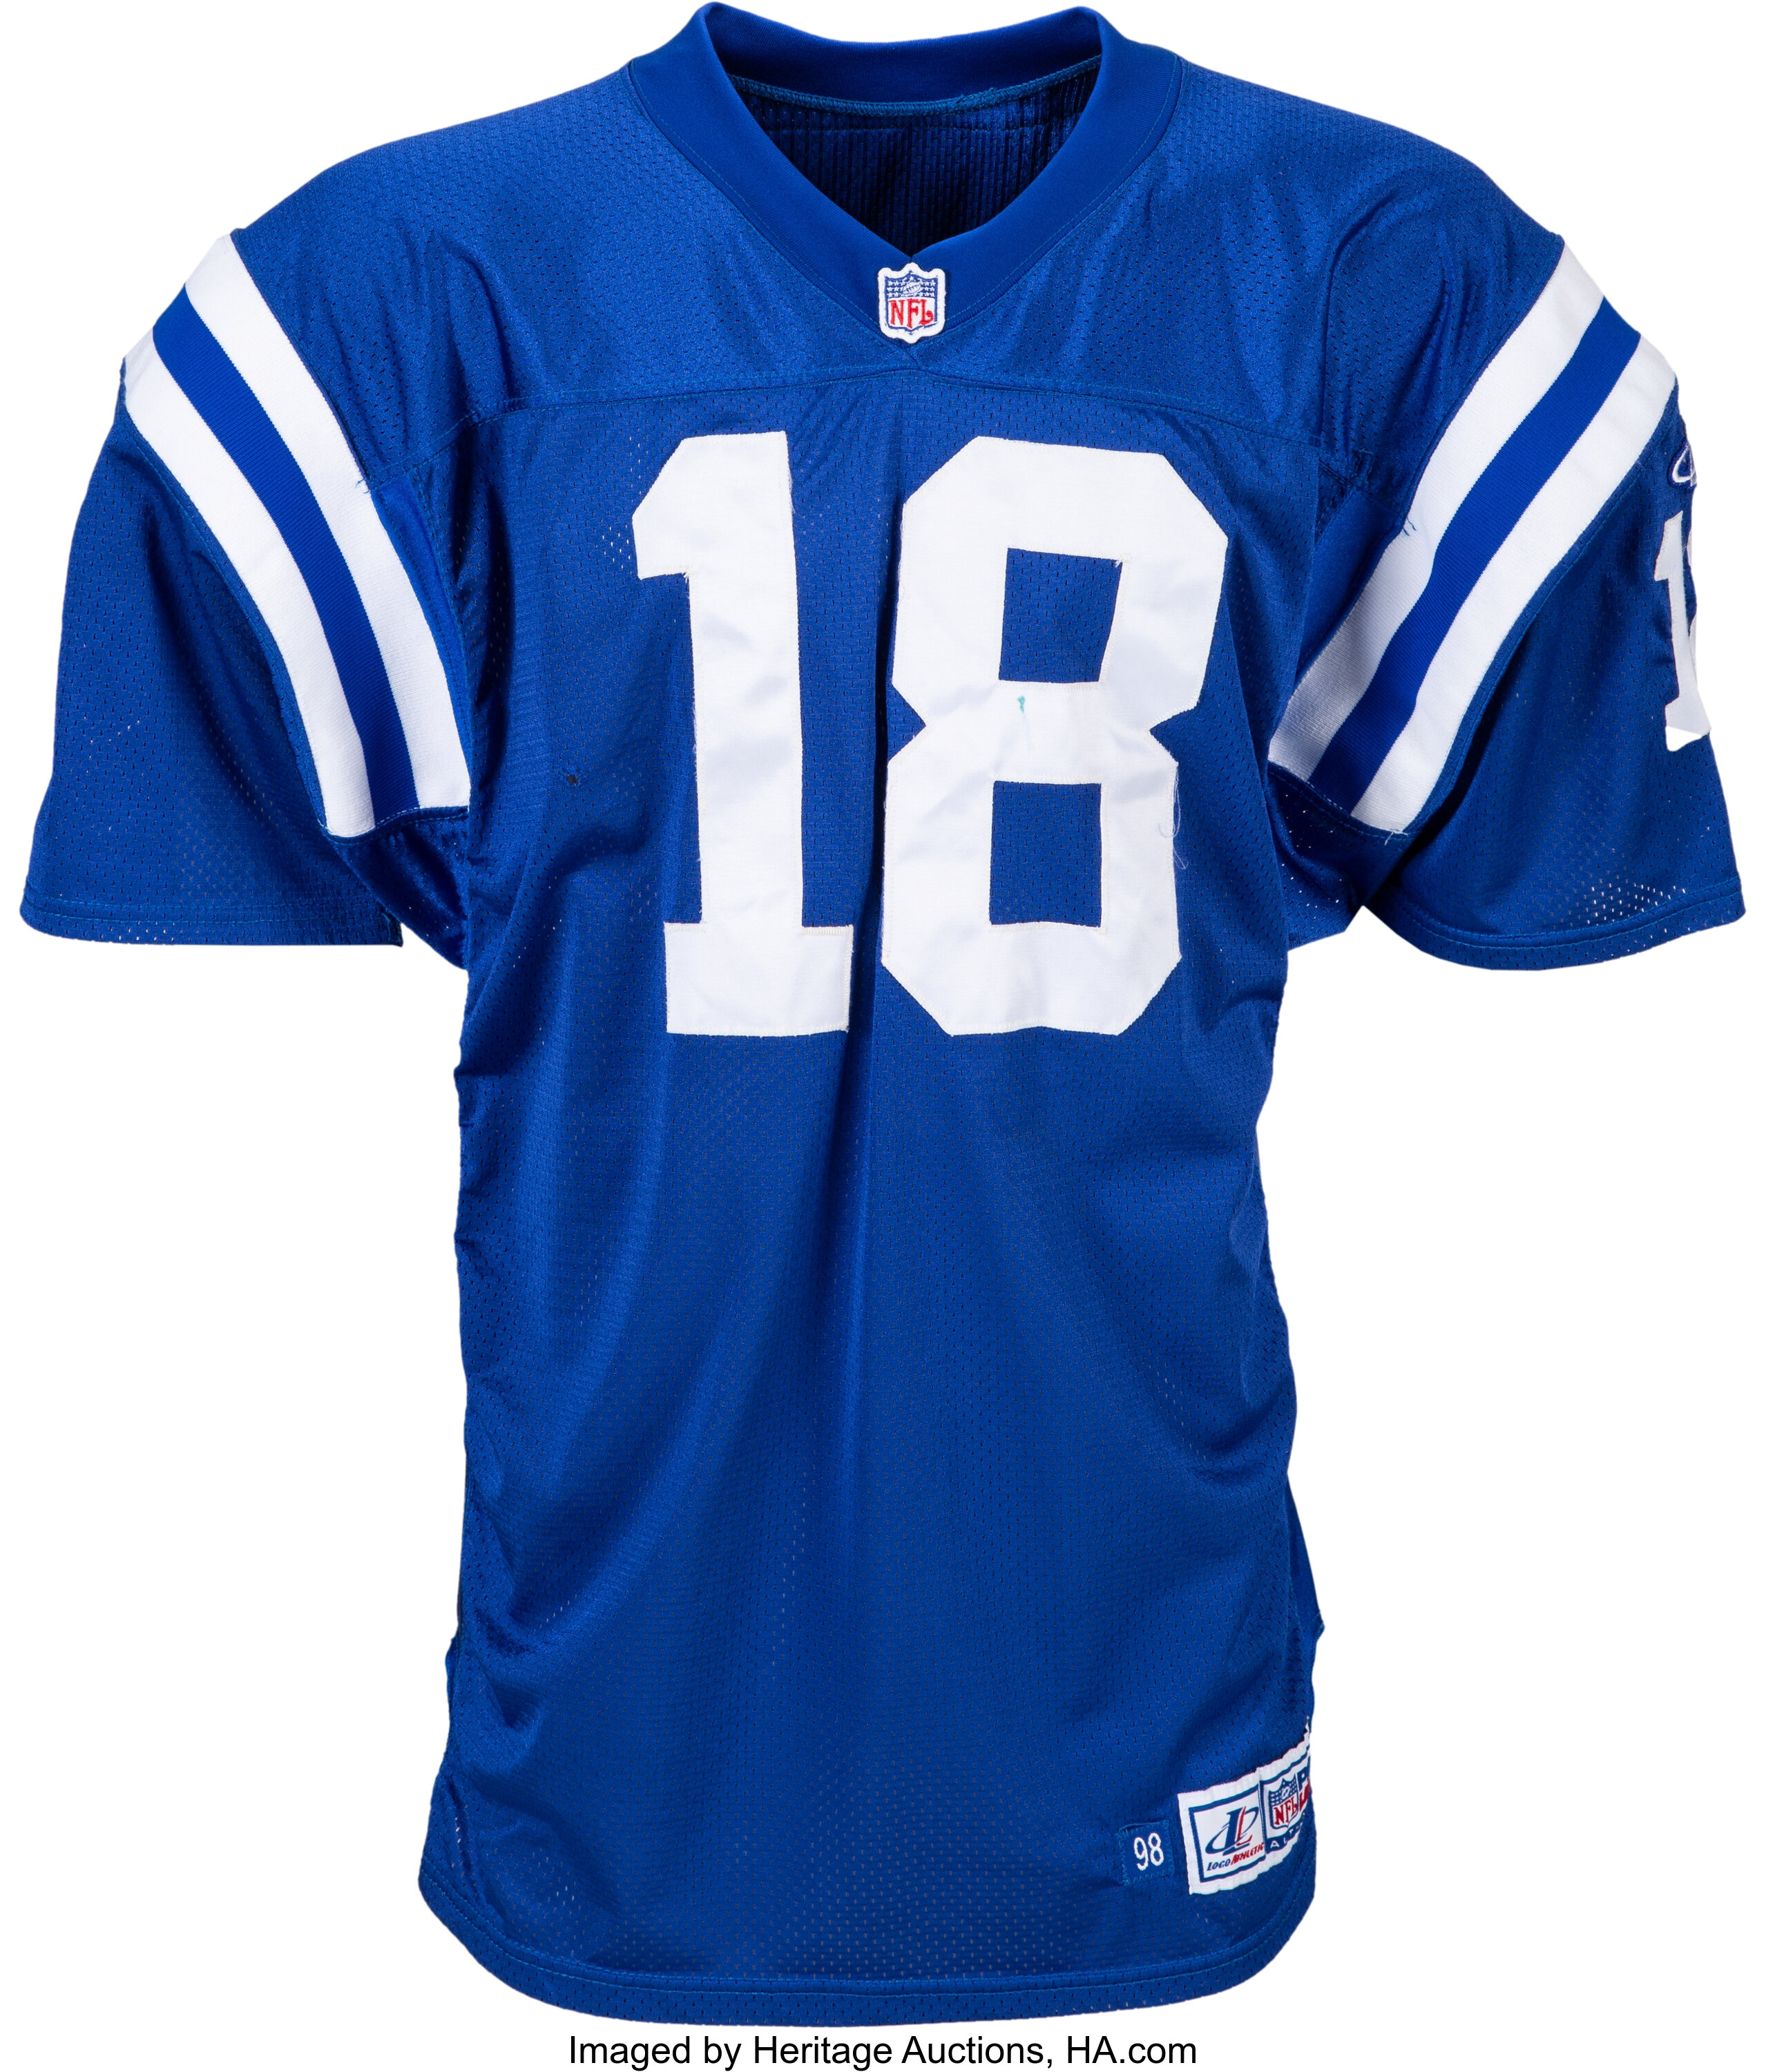 Peyton Manning jersey, authentic NFL Equipment - clothing & accessories -  by owner - apparel sale - craigslist